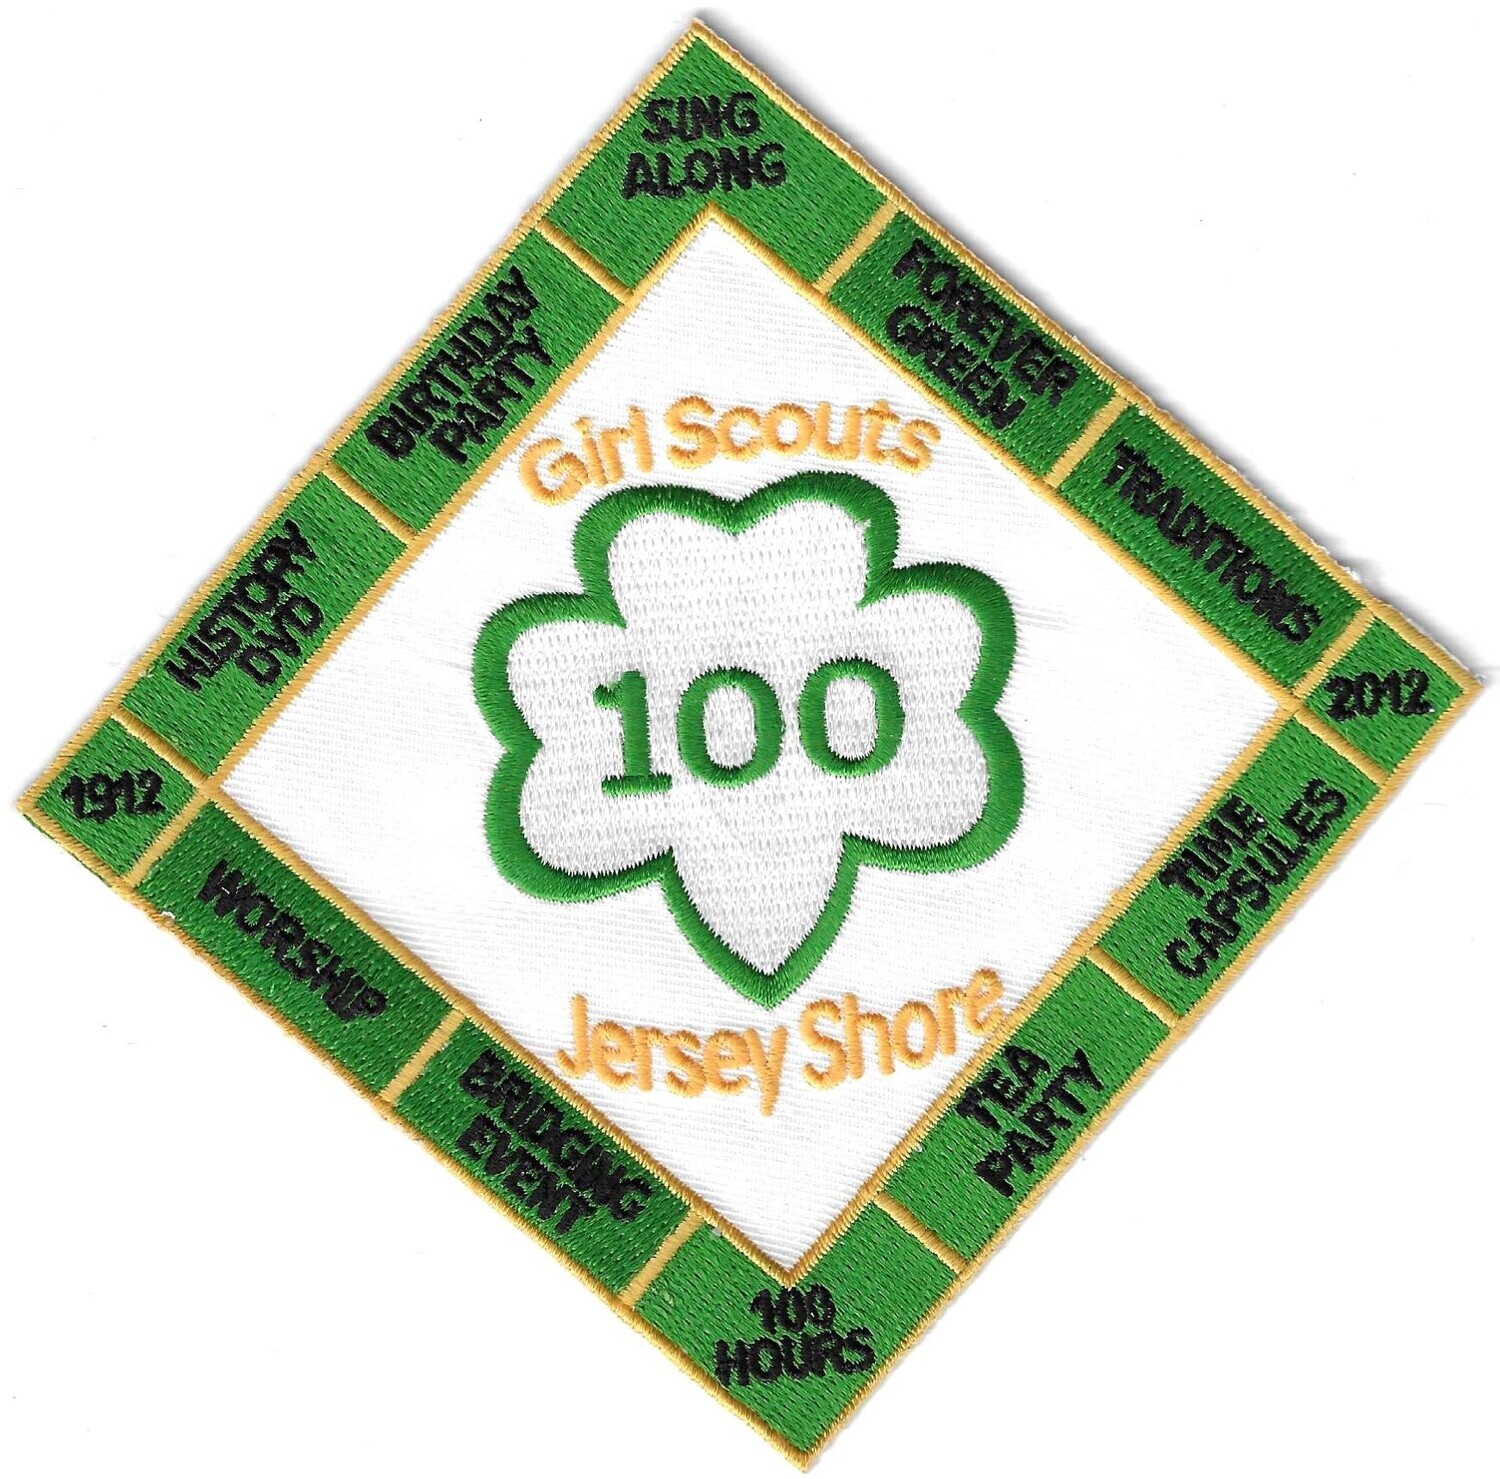 100th Anniversary Patch Jersey Shore (large patch)